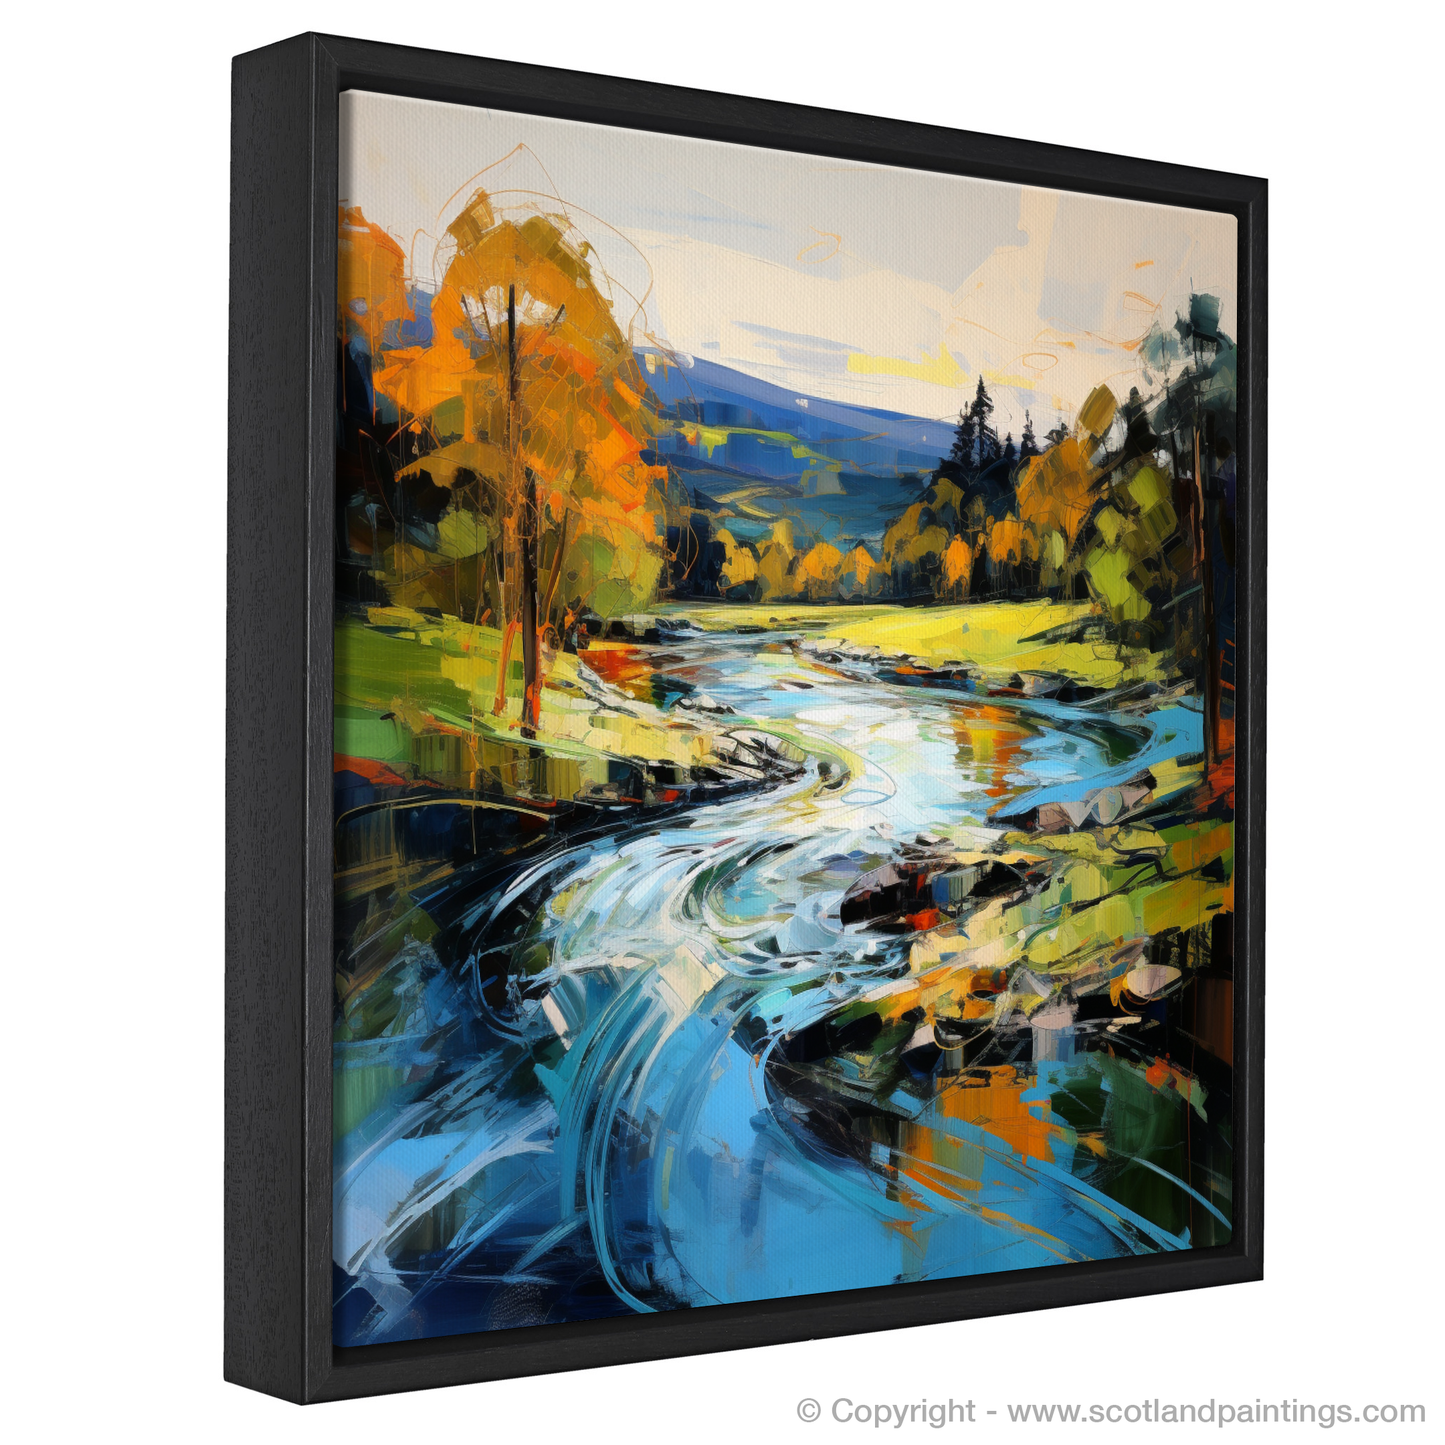 Painting and Art Print of River Lyon, Perthshire entitled "Autumnal Glow of River Lyon: An Expressionist Tribute".